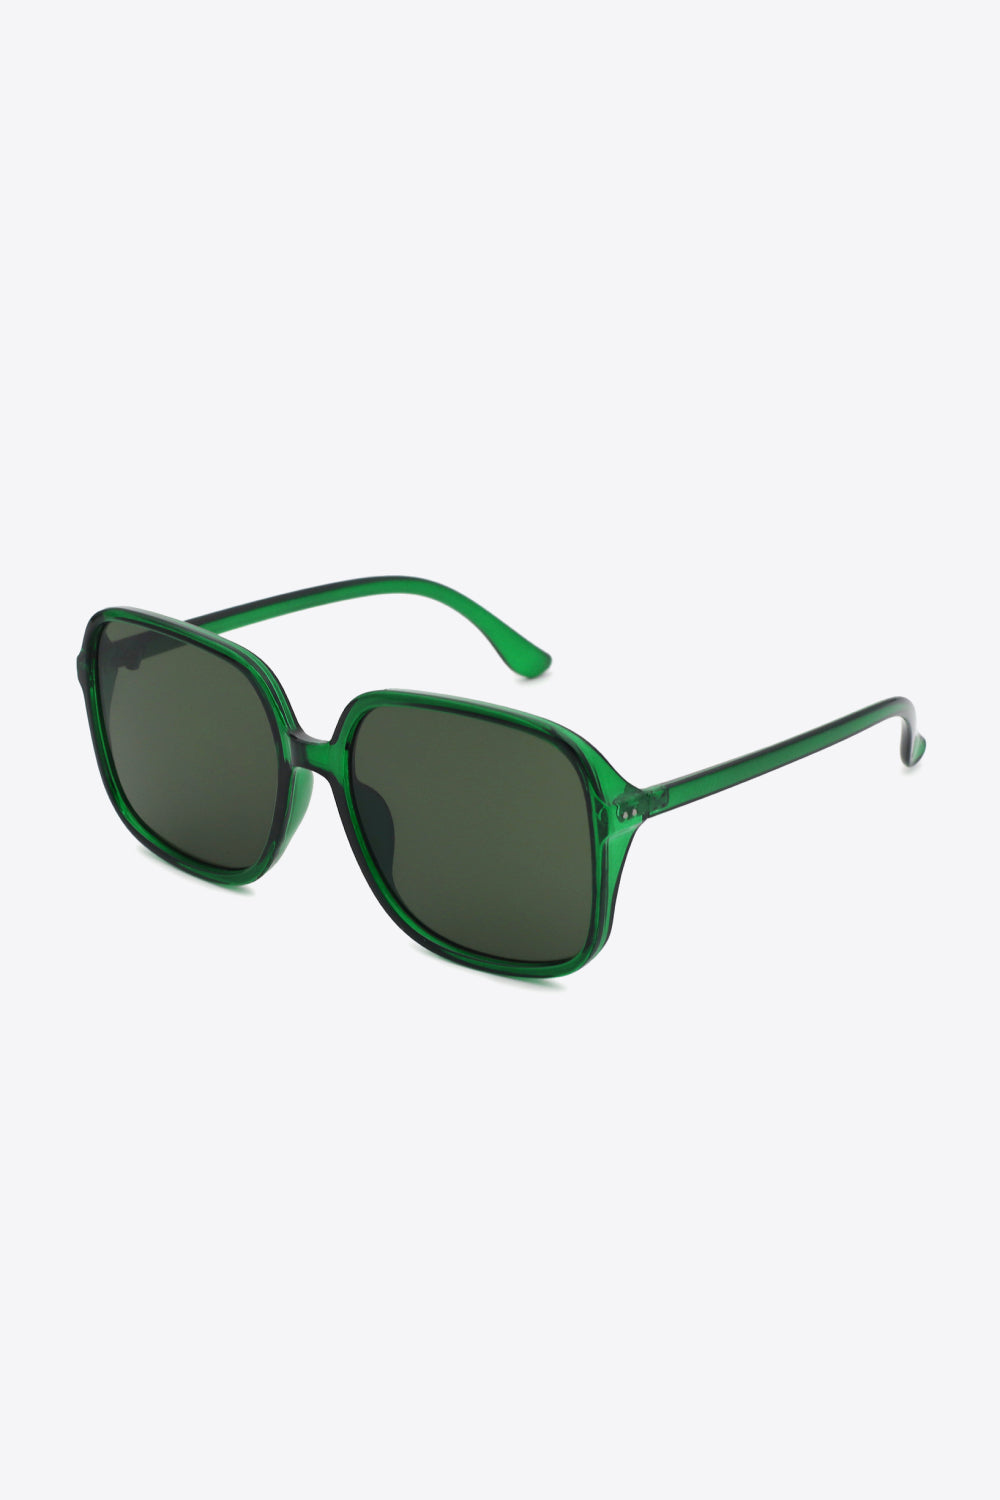 Vibrant Vision Square Frame Sunglasses in Green, Black, Yellow, and Red